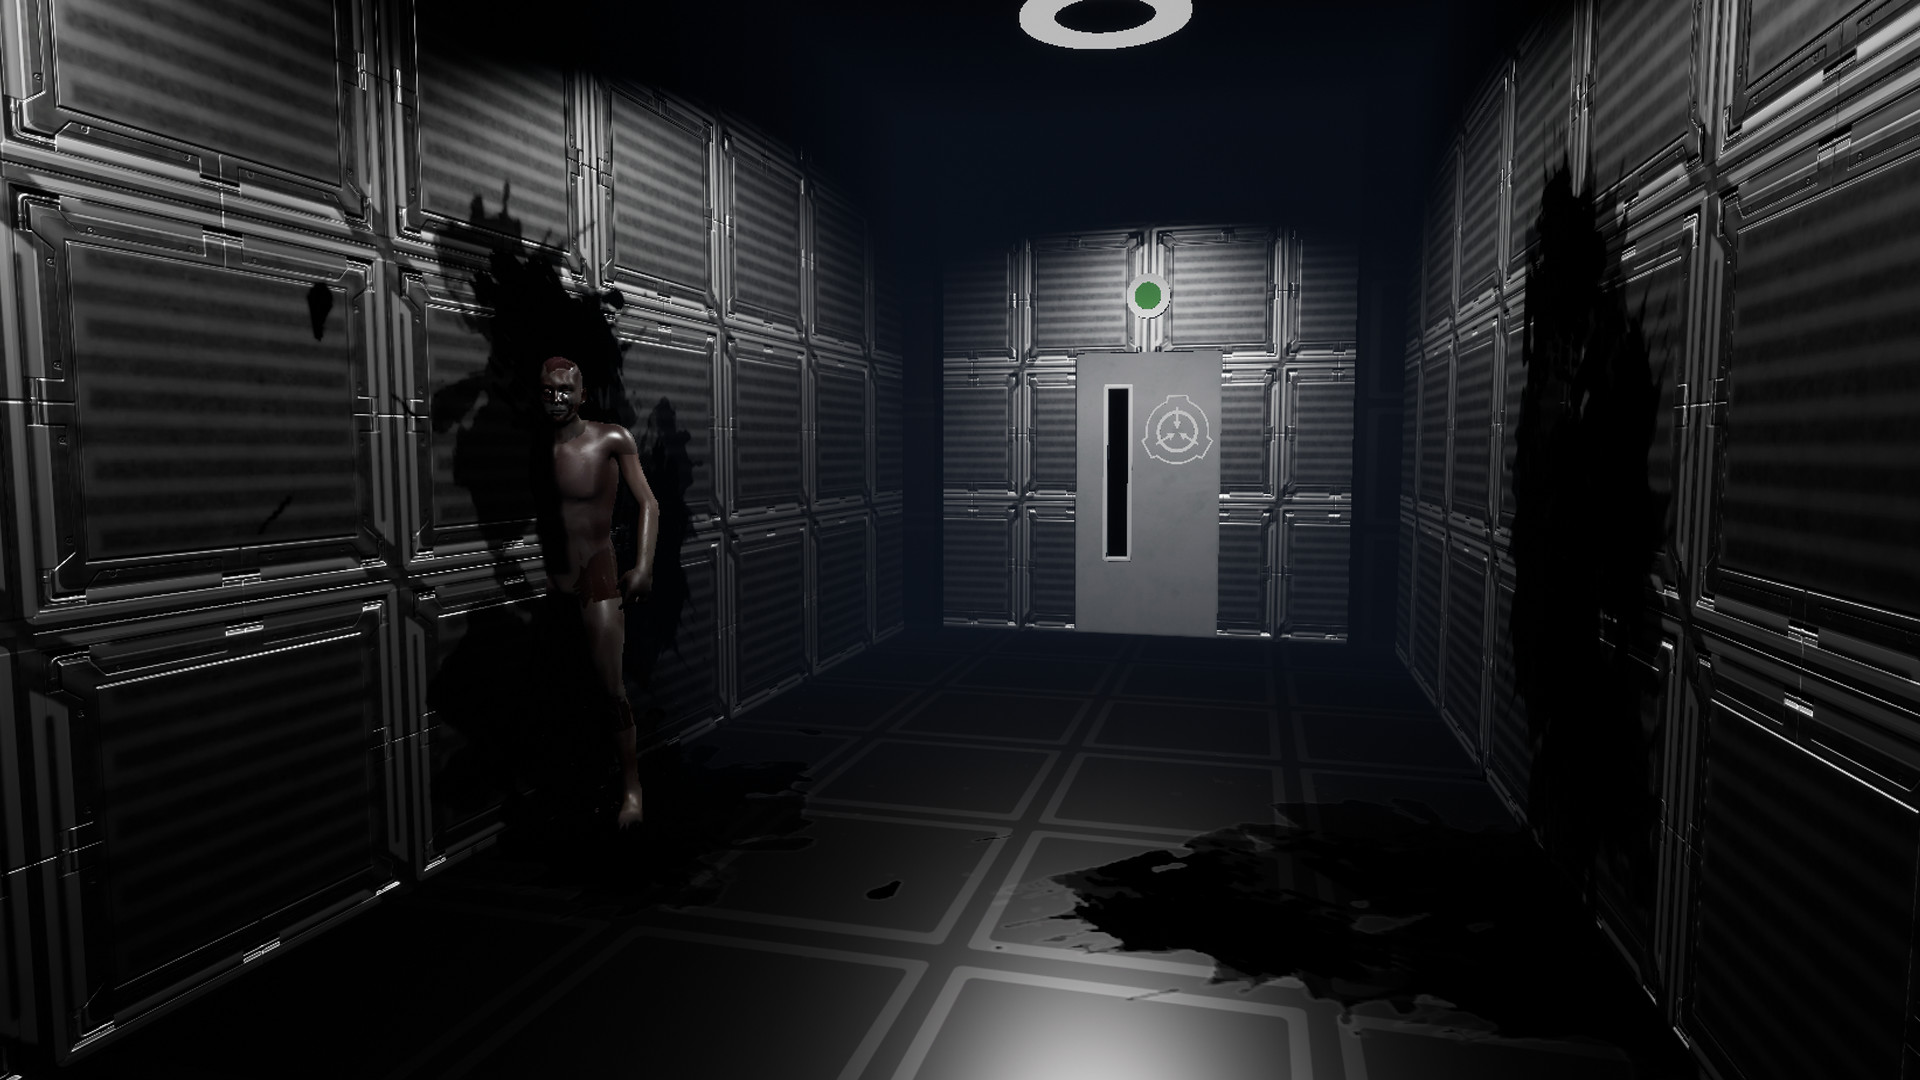 free download scp foundation game